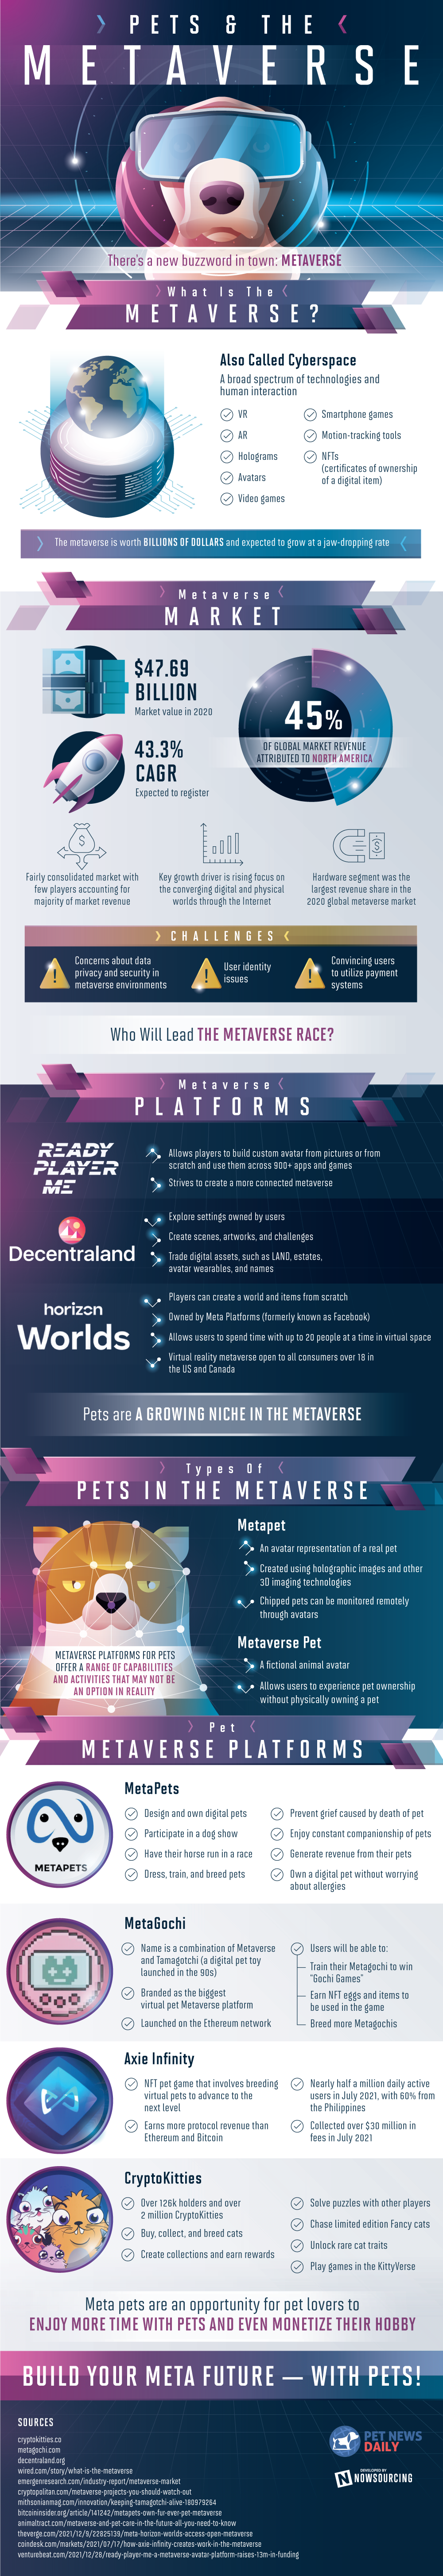 The Metaverse is the Future of Social Media